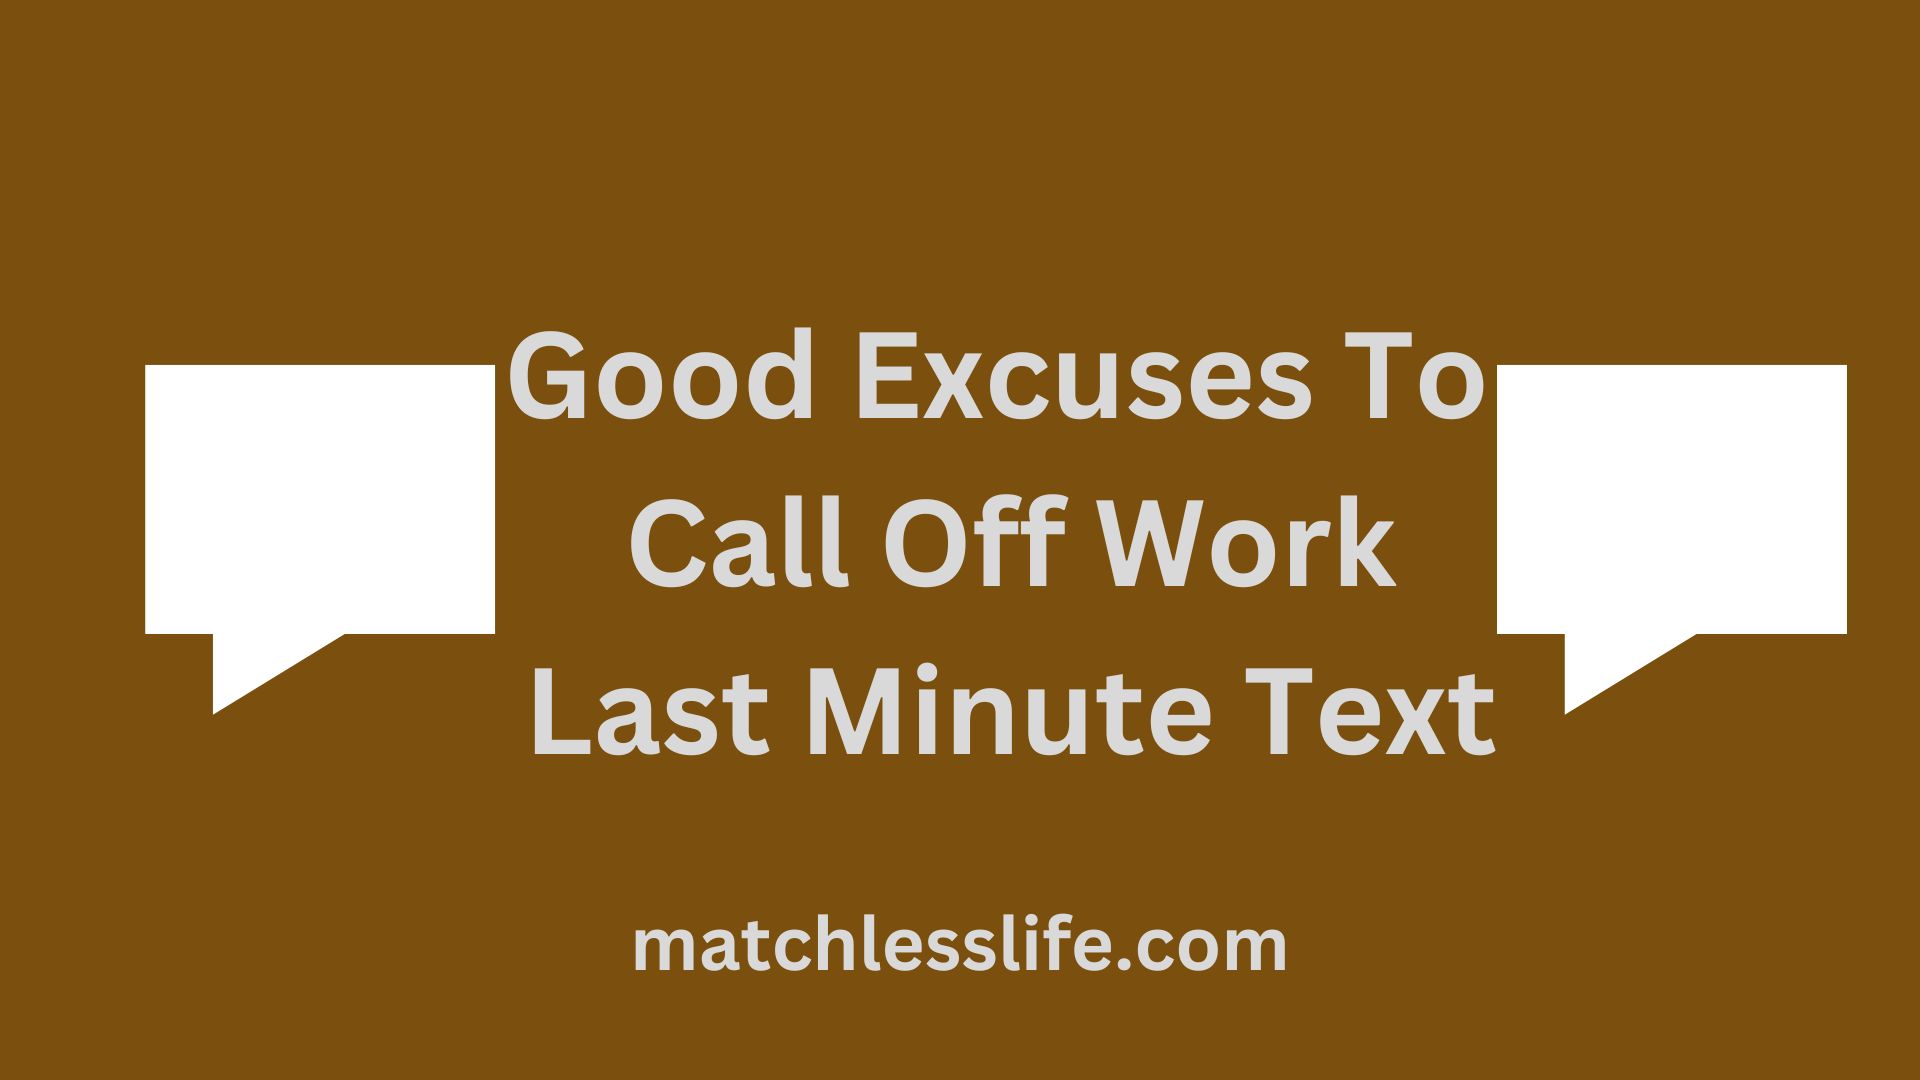 Good Excuses To Call Off Work Last Minute Text